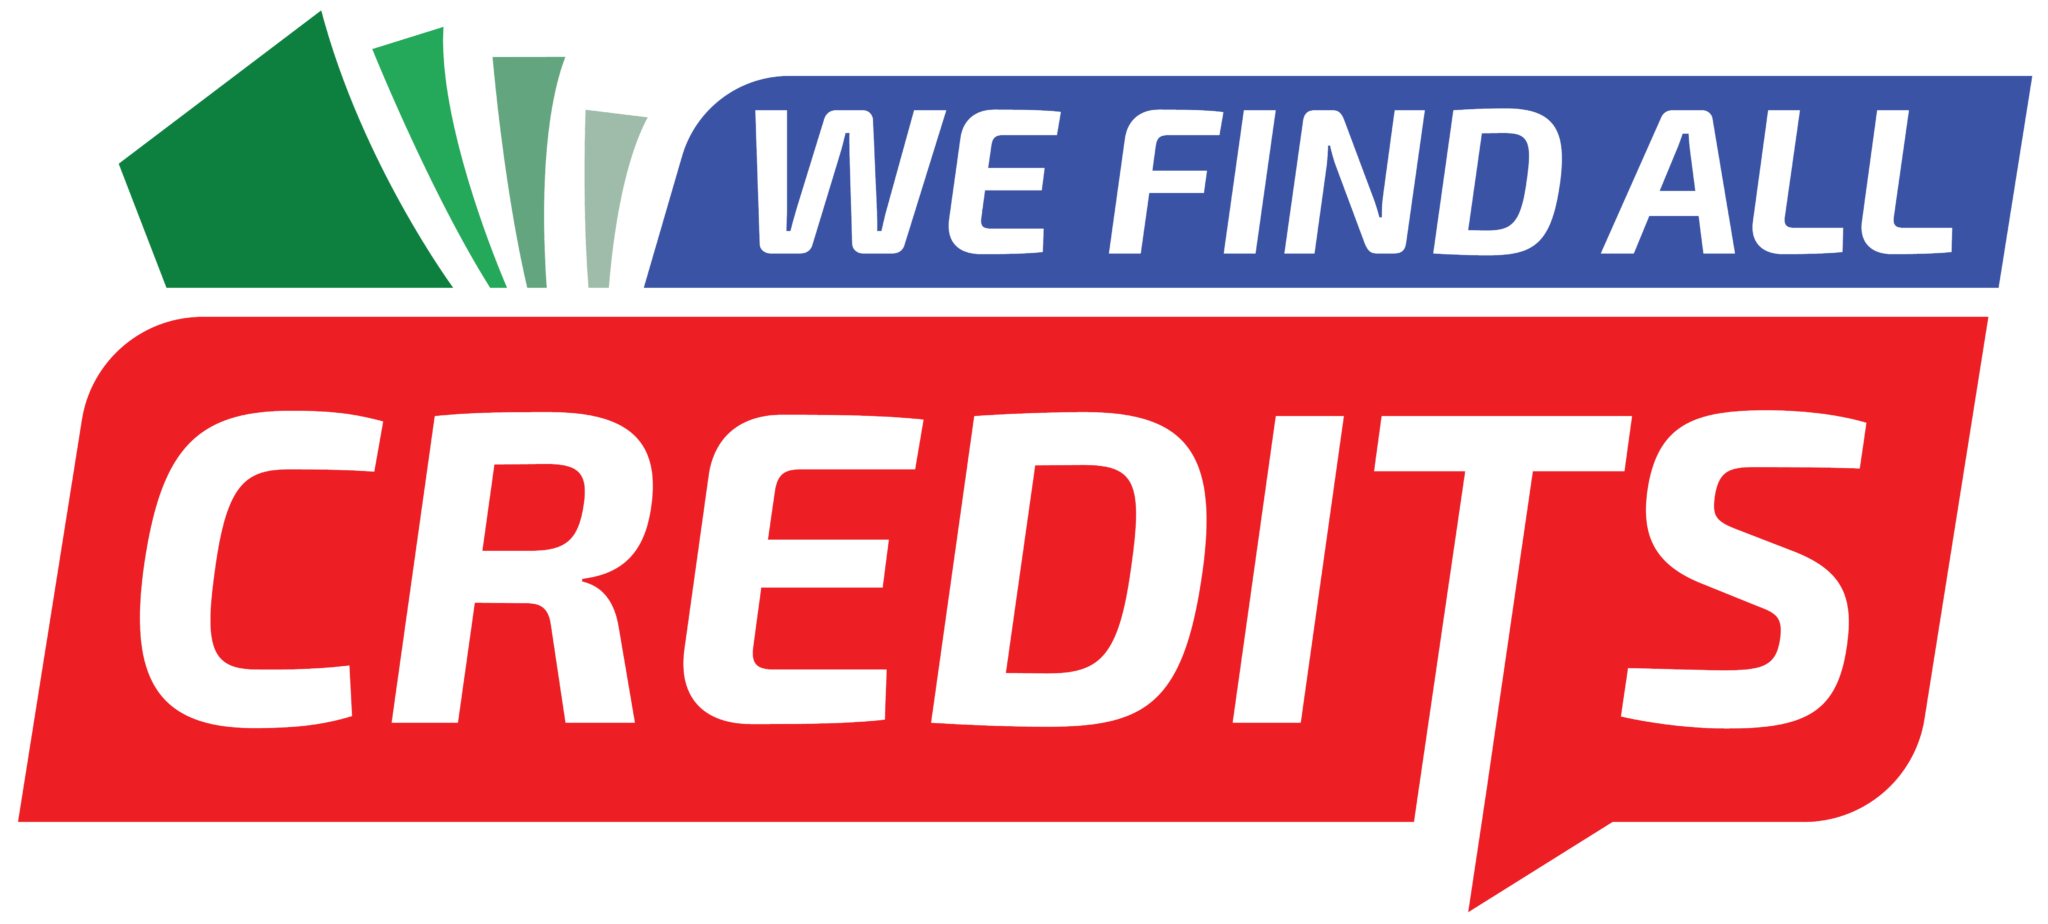 We Find All Credits